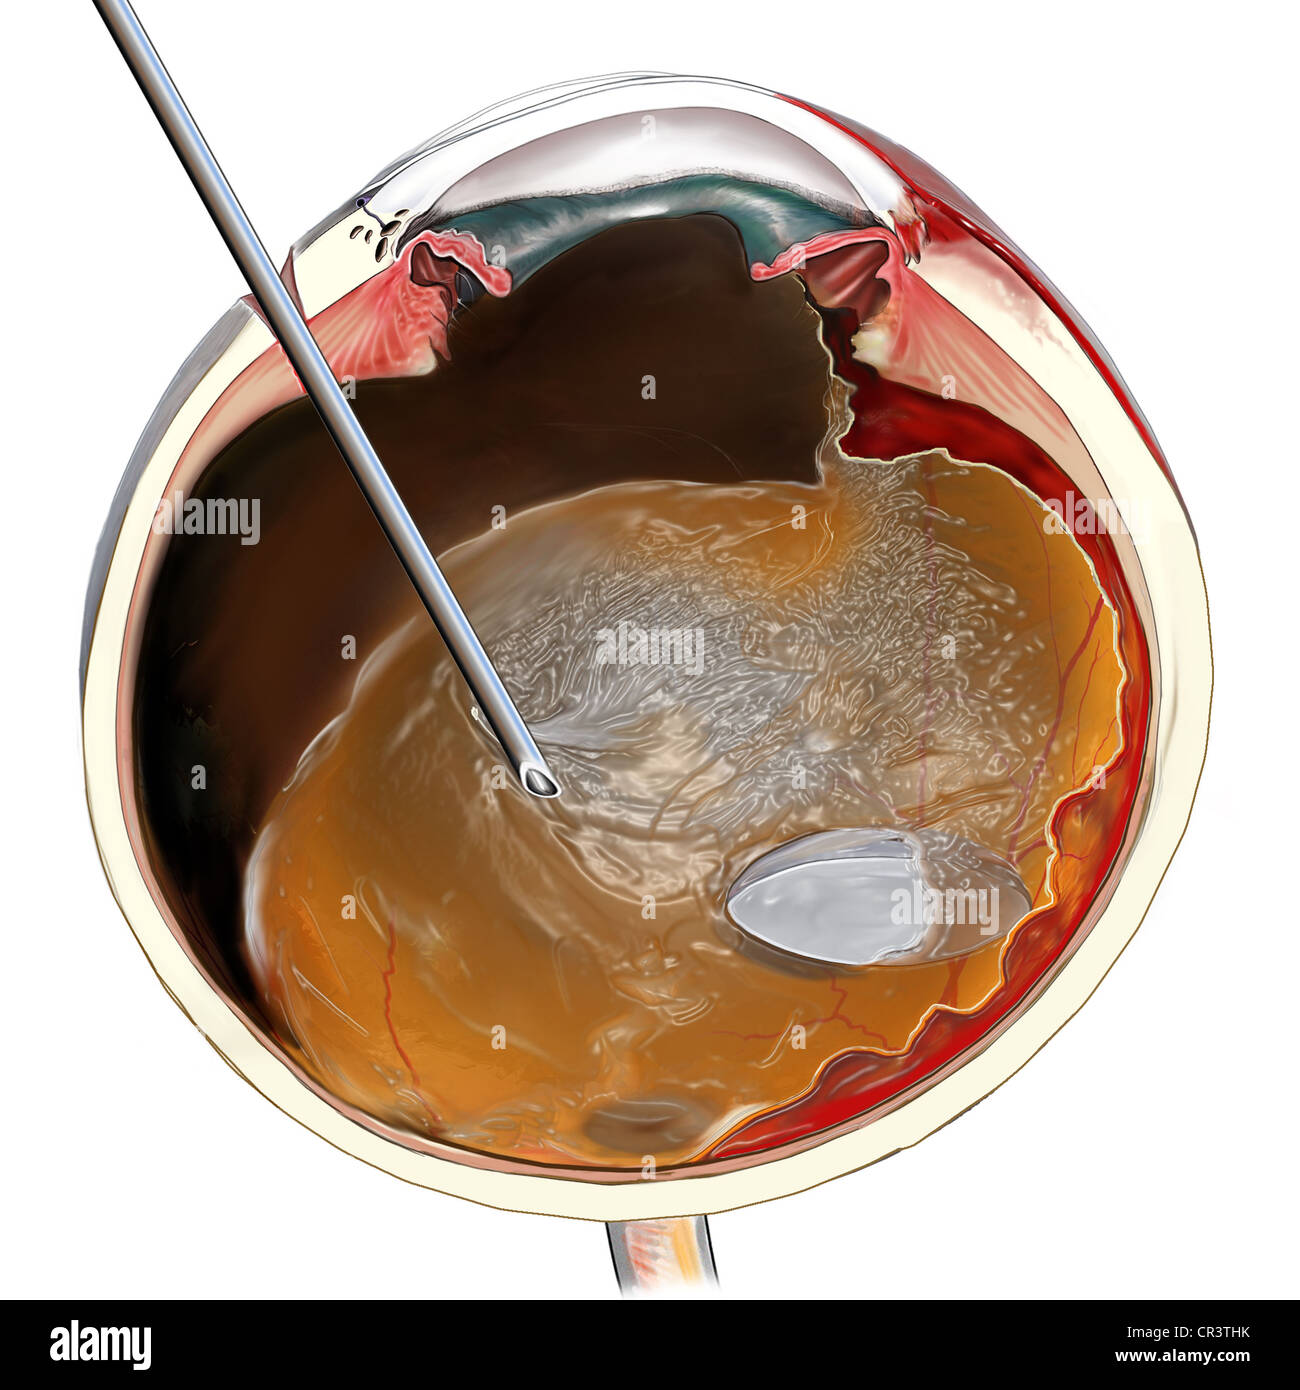 This medical illustration features an cross sectional view of the eye showing the removal of the vitreous humor from the eye. Stock Photo